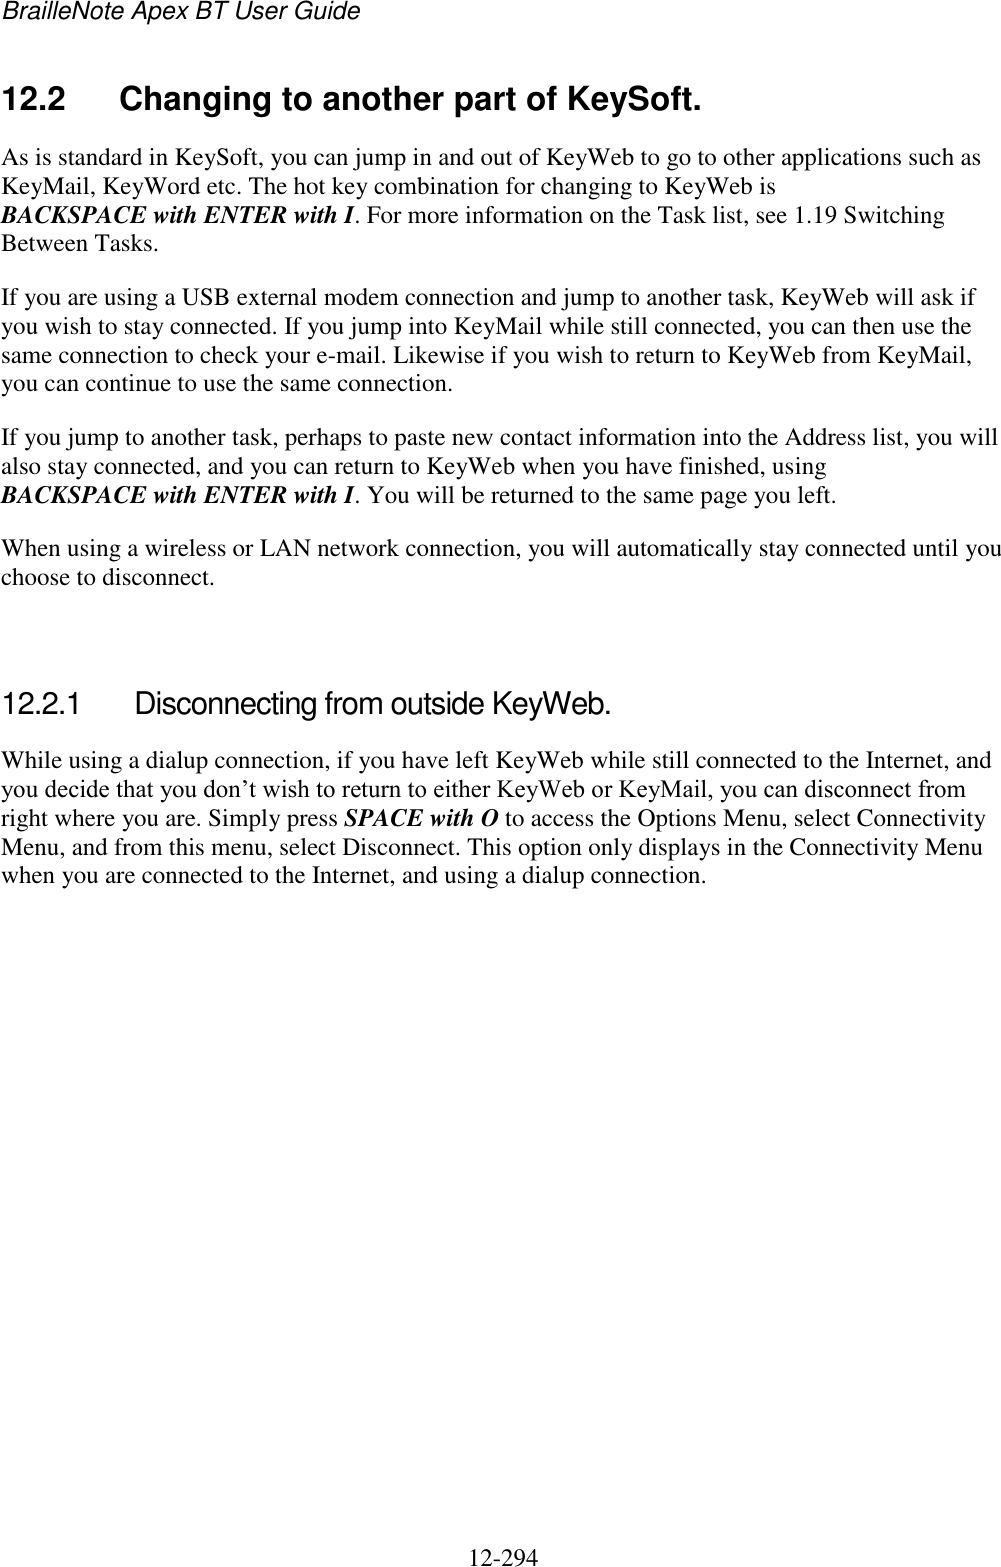 BrailleNote Apex BT User Guide   12-294   12.2  Changing to another part of KeySoft. As is standard in KeySoft, you can jump in and out of KeyWeb to go to other applications such as KeyMail, KeyWord etc. The hot key combination for changing to KeyWeb is BACKSPACE with ENTER with I. For more information on the Task list, see 1.19 Switching Between Tasks. If you are using a USB external modem connection and jump to another task, KeyWeb will ask if you wish to stay connected. If you jump into KeyMail while still connected, you can then use the same connection to check your e-mail. Likewise if you wish to return to KeyWeb from KeyMail, you can continue to use the same connection. If you jump to another task, perhaps to paste new contact information into the Address list, you will also stay connected, and you can return to KeyWeb when you have finished, using BACKSPACE with ENTER with I. You will be returned to the same page you left. When using a wireless or LAN network connection, you will automatically stay connected until you choose to disconnect.   12.2.1  Disconnecting from outside KeyWeb. While using a dialup connection, if you have left KeyWeb while still connected to the Internet, and you decide that you don‟t wish to return to either KeyWeb or KeyMail, you can disconnect from right where you are. Simply press SPACE with O to access the Options Menu, select Connectivity Menu, and from this menu, select Disconnect. This option only displays in the Connectivity Menu when you are connected to the Internet, and using a dialup connection.   